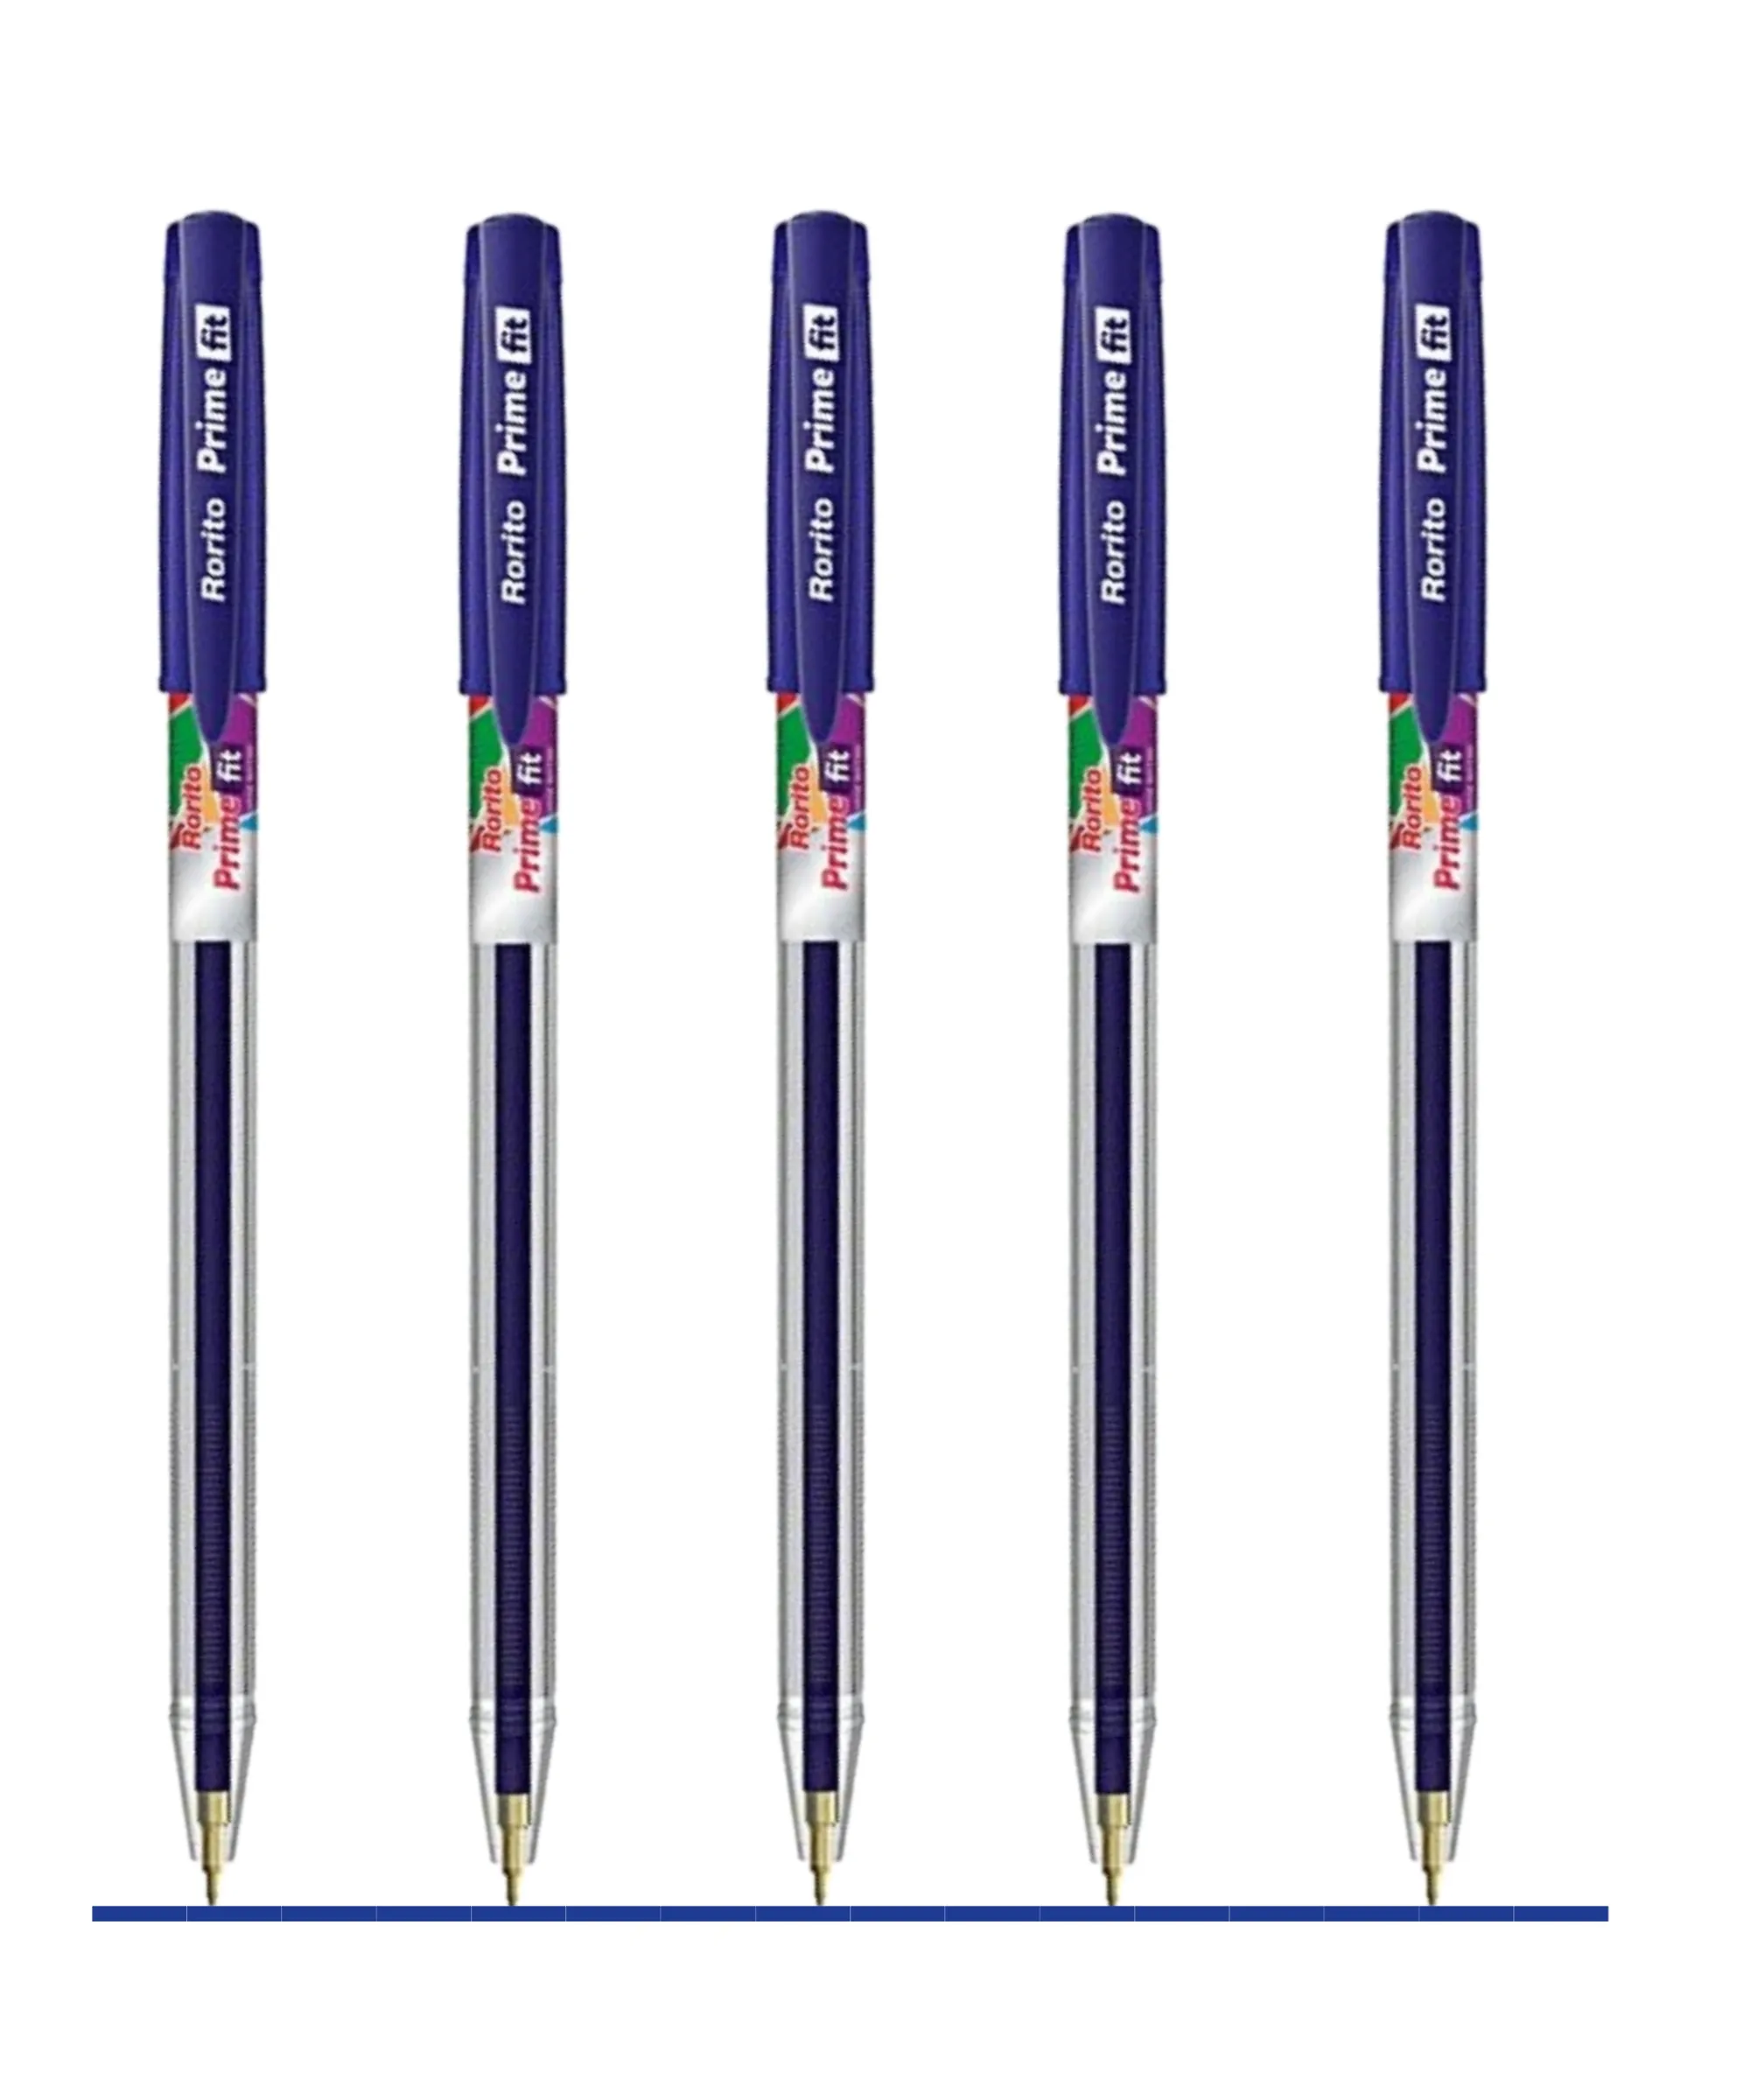 Rorito Prime Fit Ball Pen (Blue) - Pack of 5